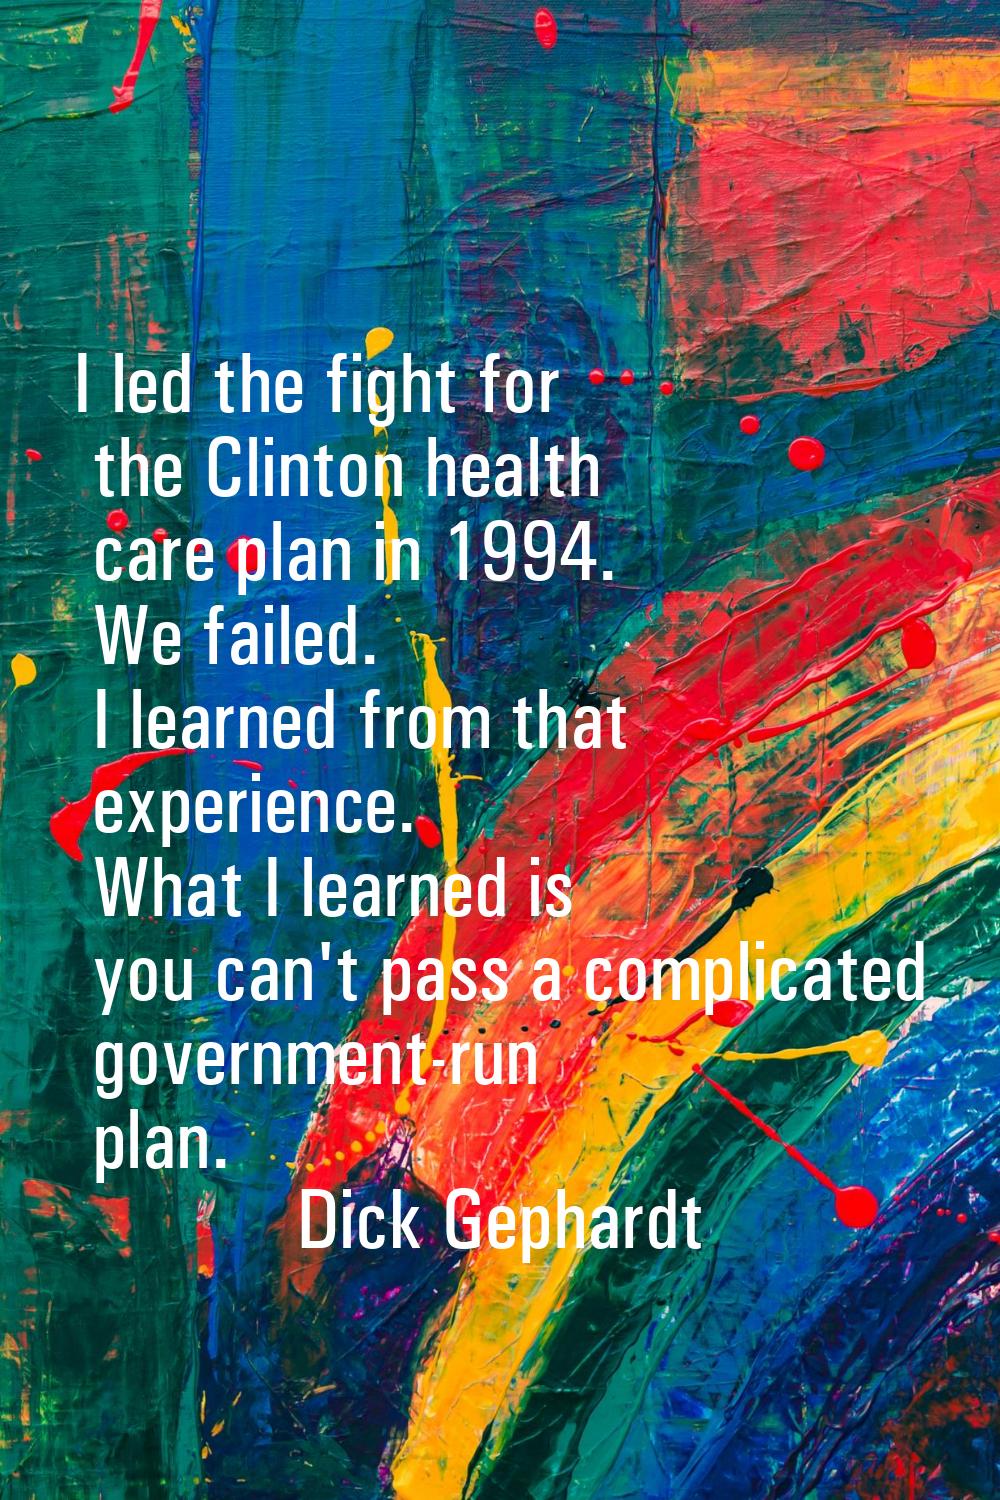 I led the fight for the Clinton health care plan in 1994. We failed. I learned from that experience